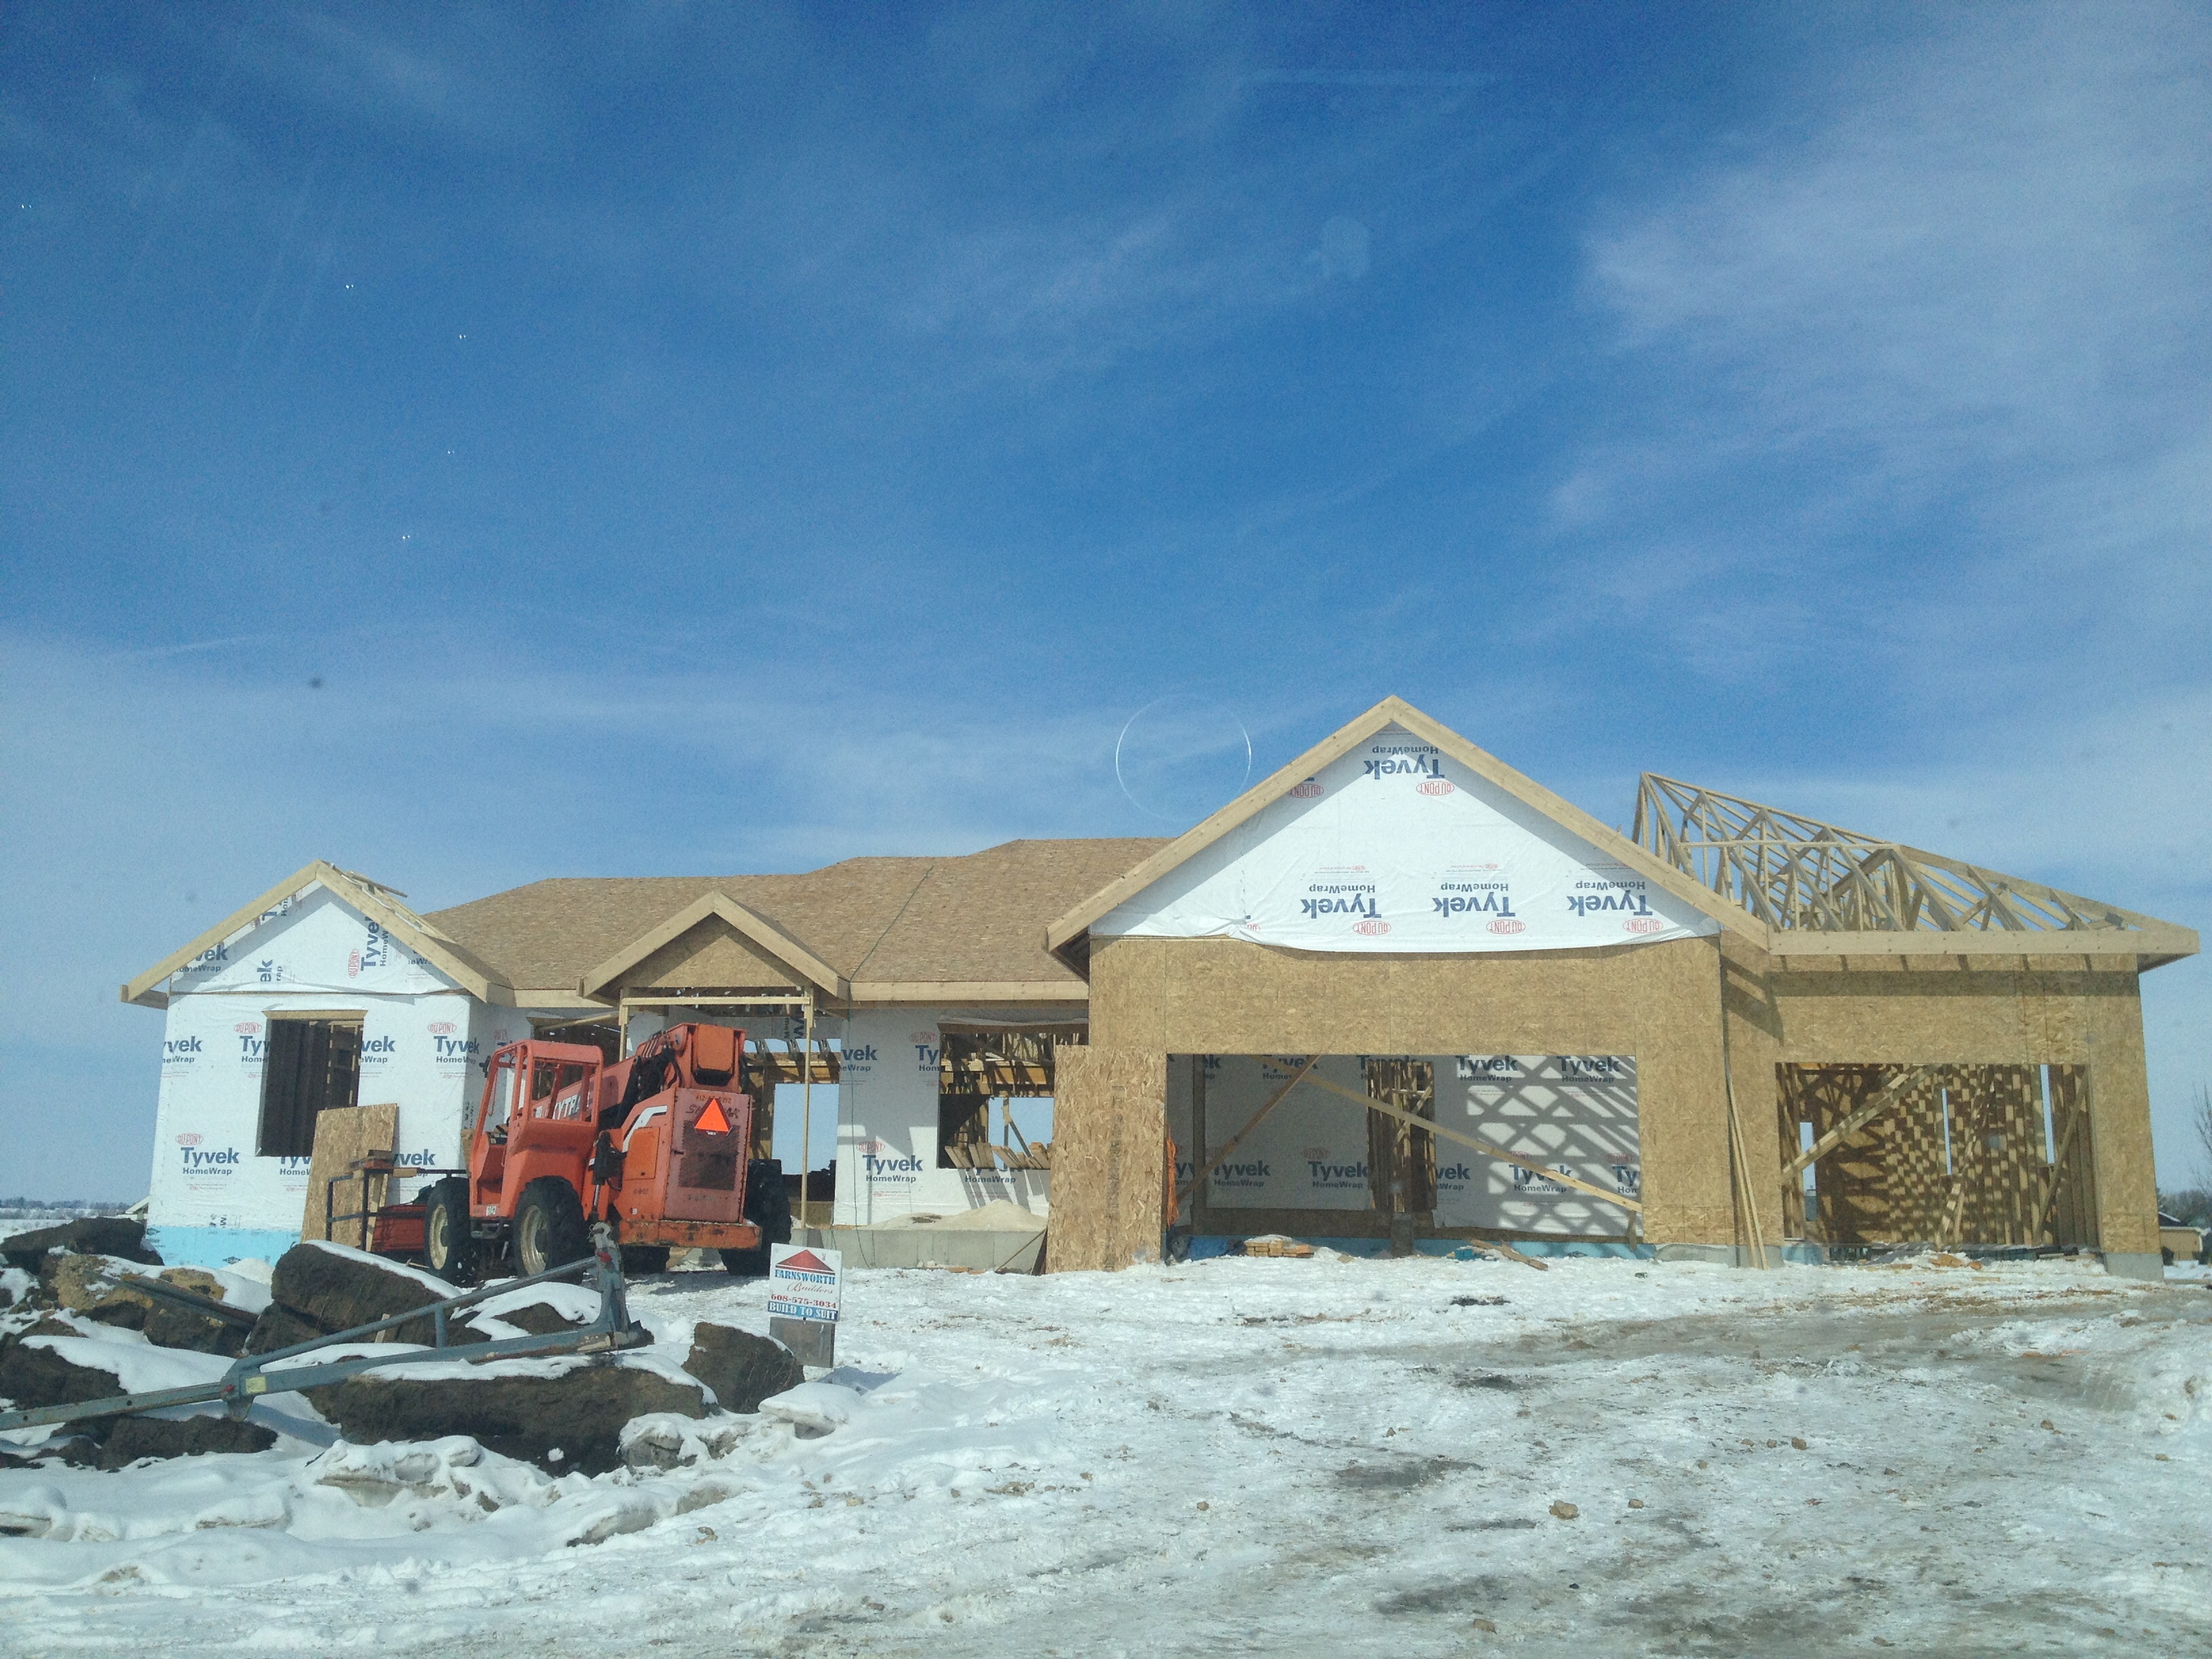 Work on the Parade of Homes begins in winter